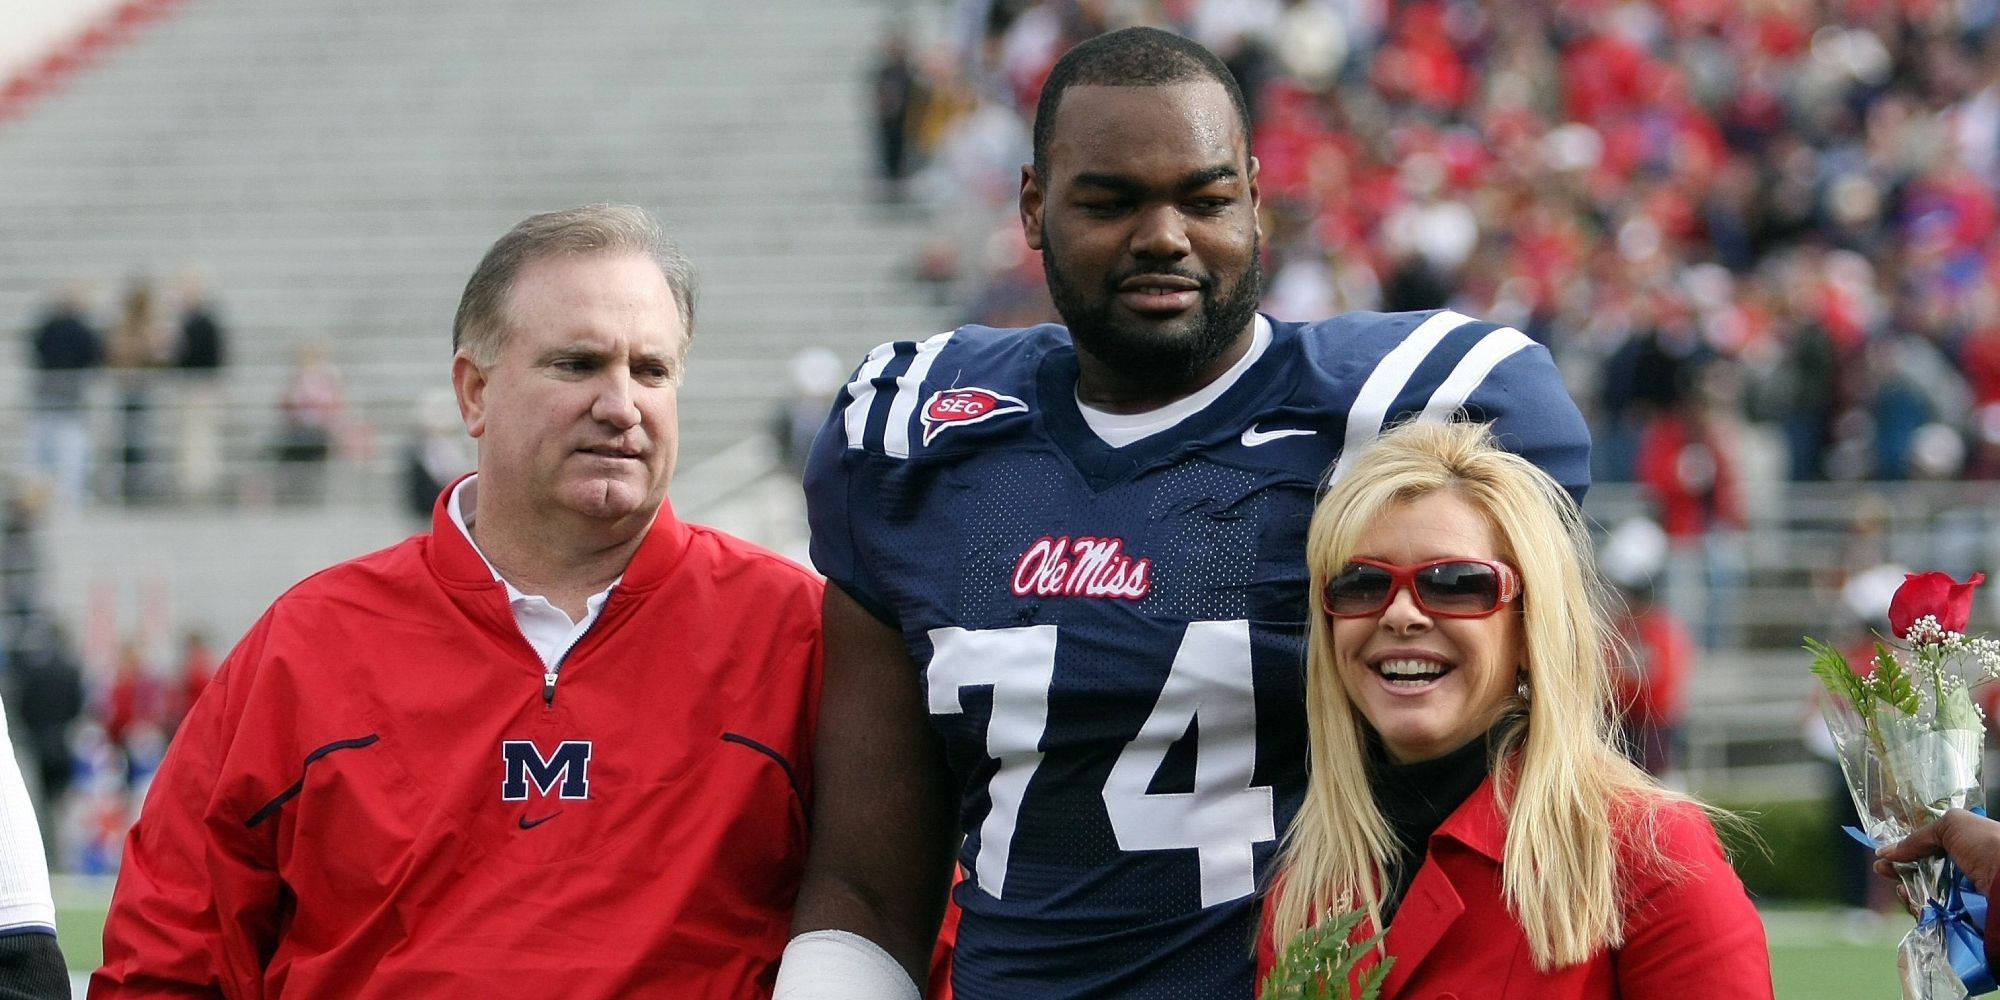 Sean Tuohy, Michael Oher, and Leigh Anne Tuohy pose for a picture after an Ole Miss football game